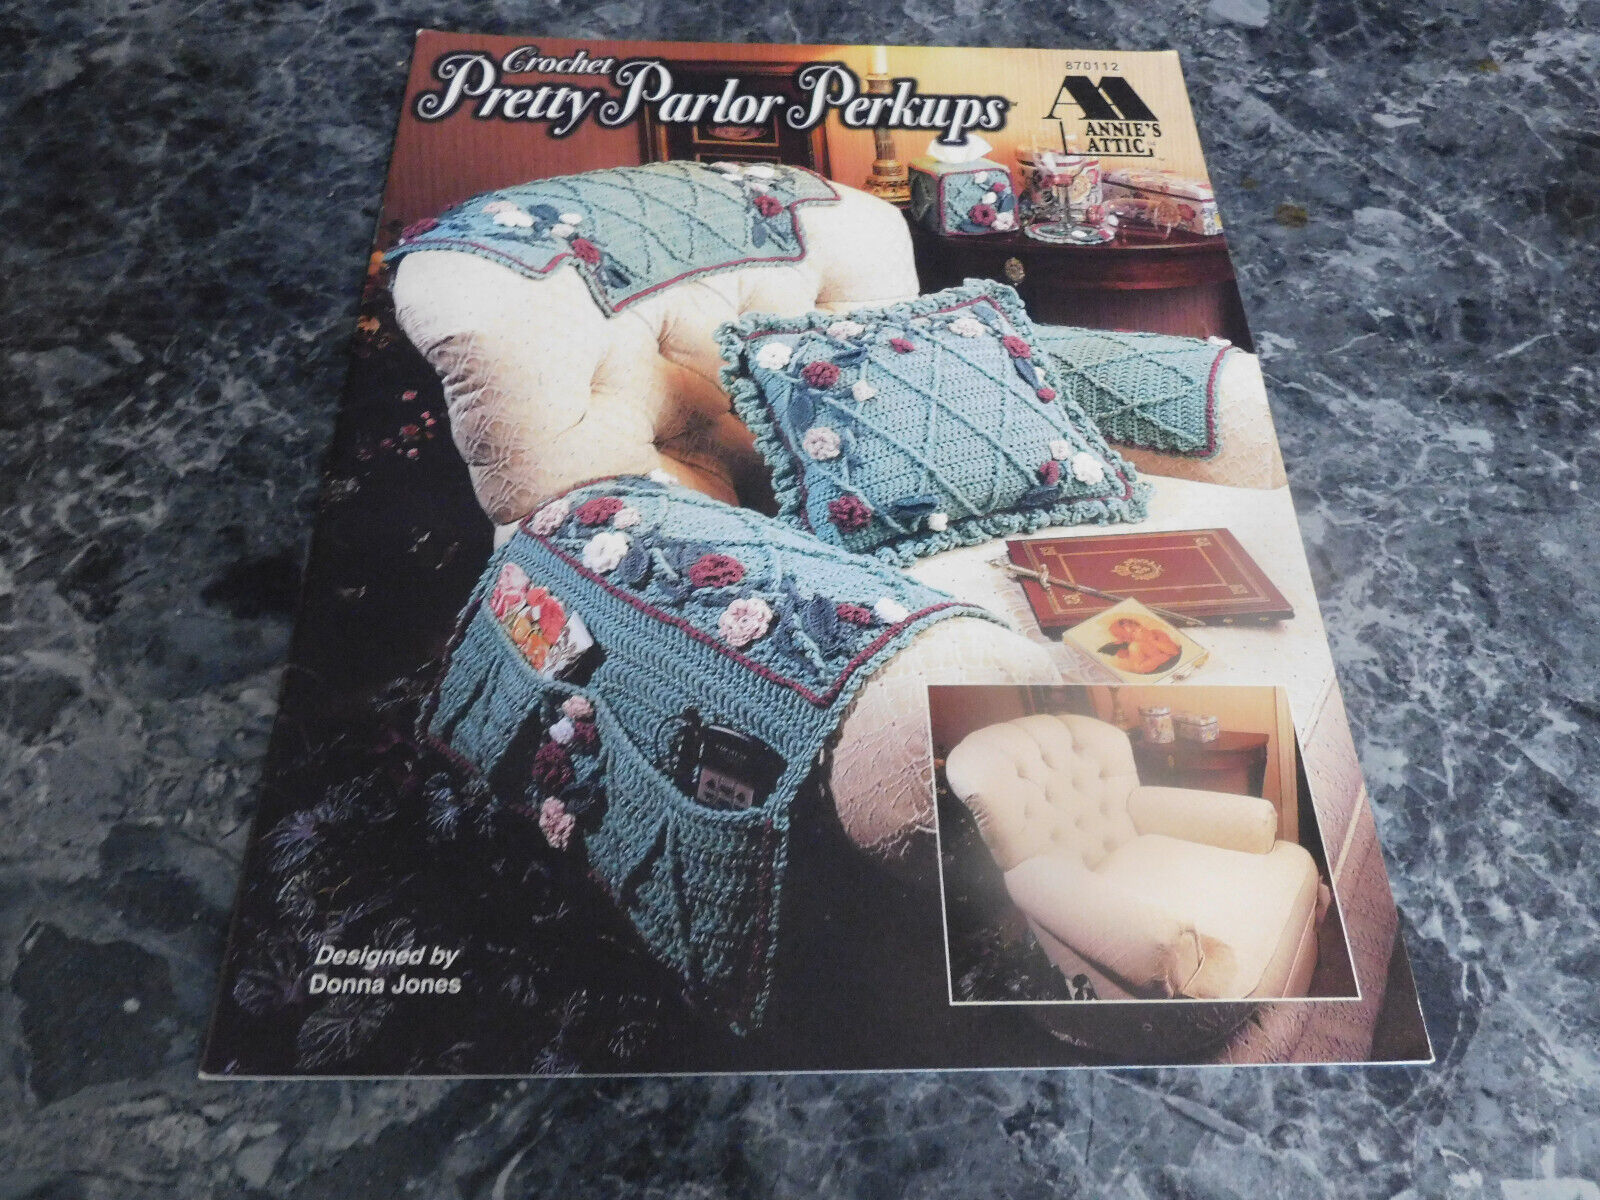 Primary image for Pretty Parlor Perkups by Donna Jones